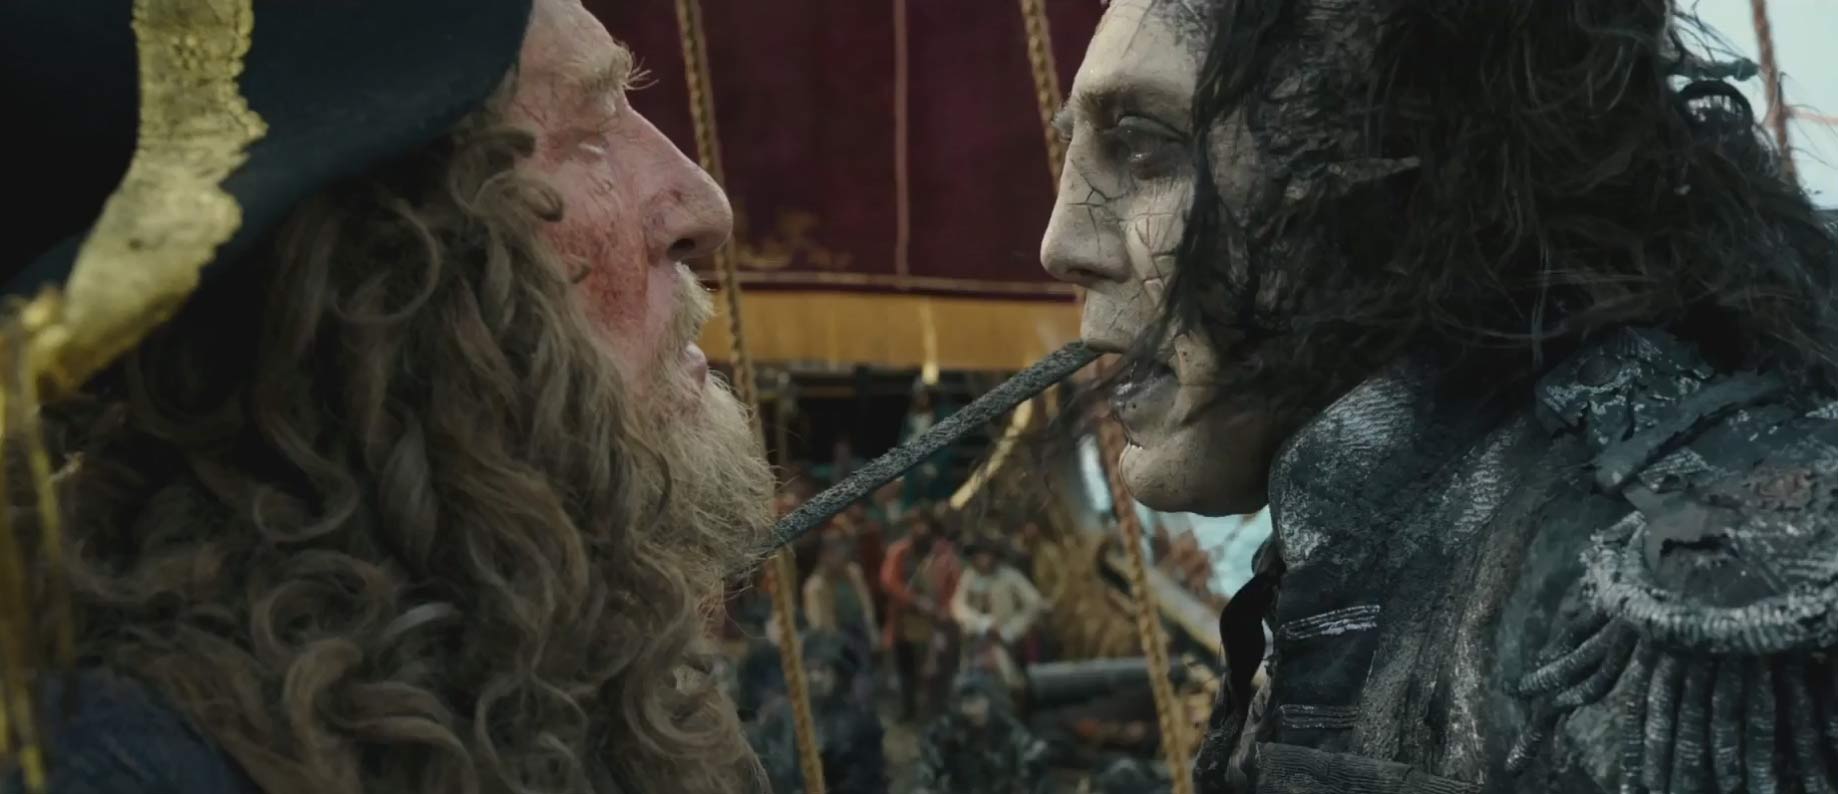 Pirates of the Caribbean: Dead Men Tell No Tales Trailer 2